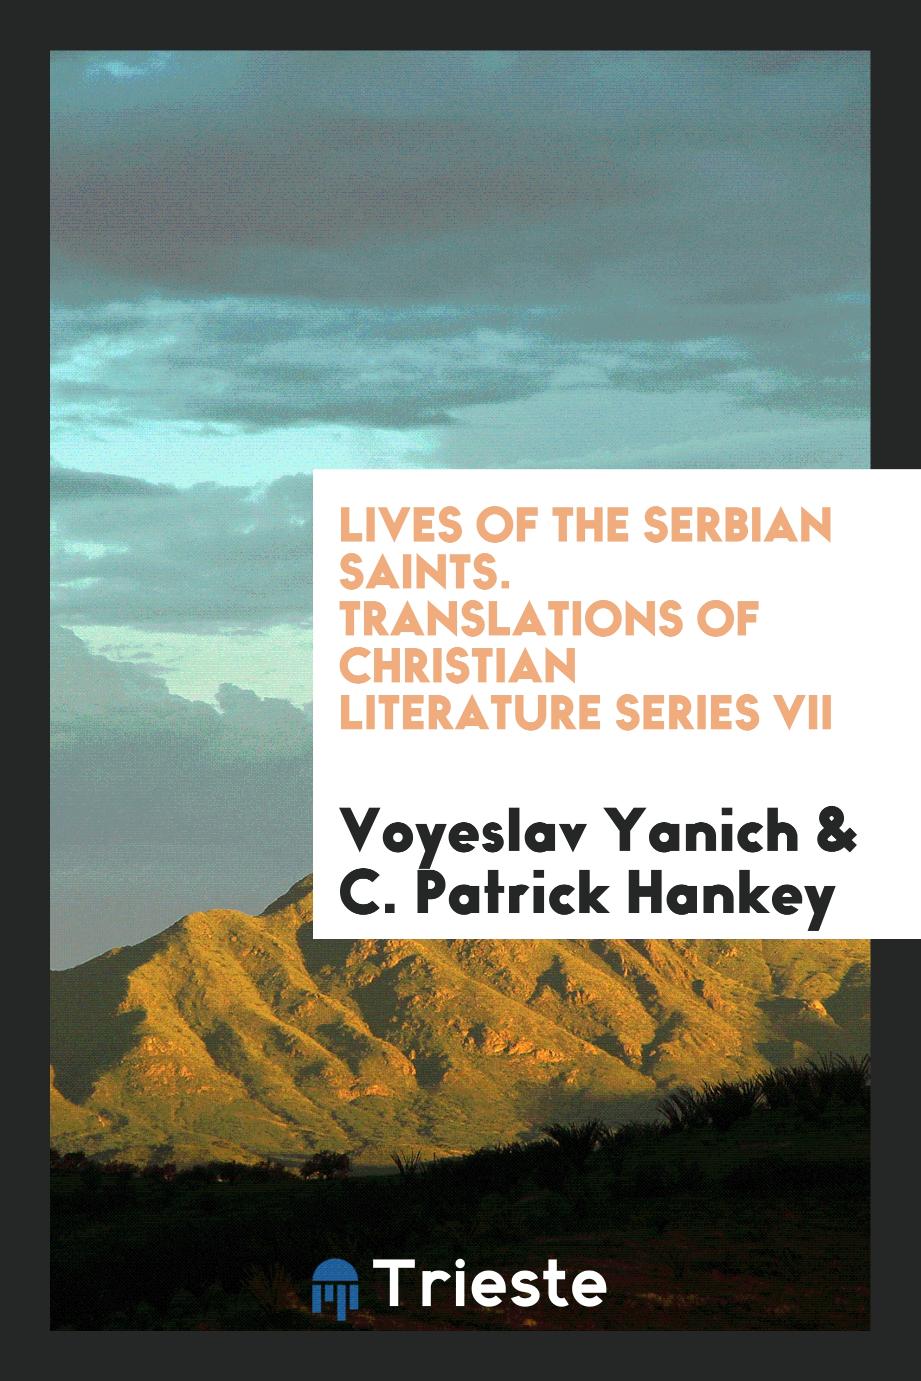 Lives of the Serbian saints. Translations of christian literature series VII